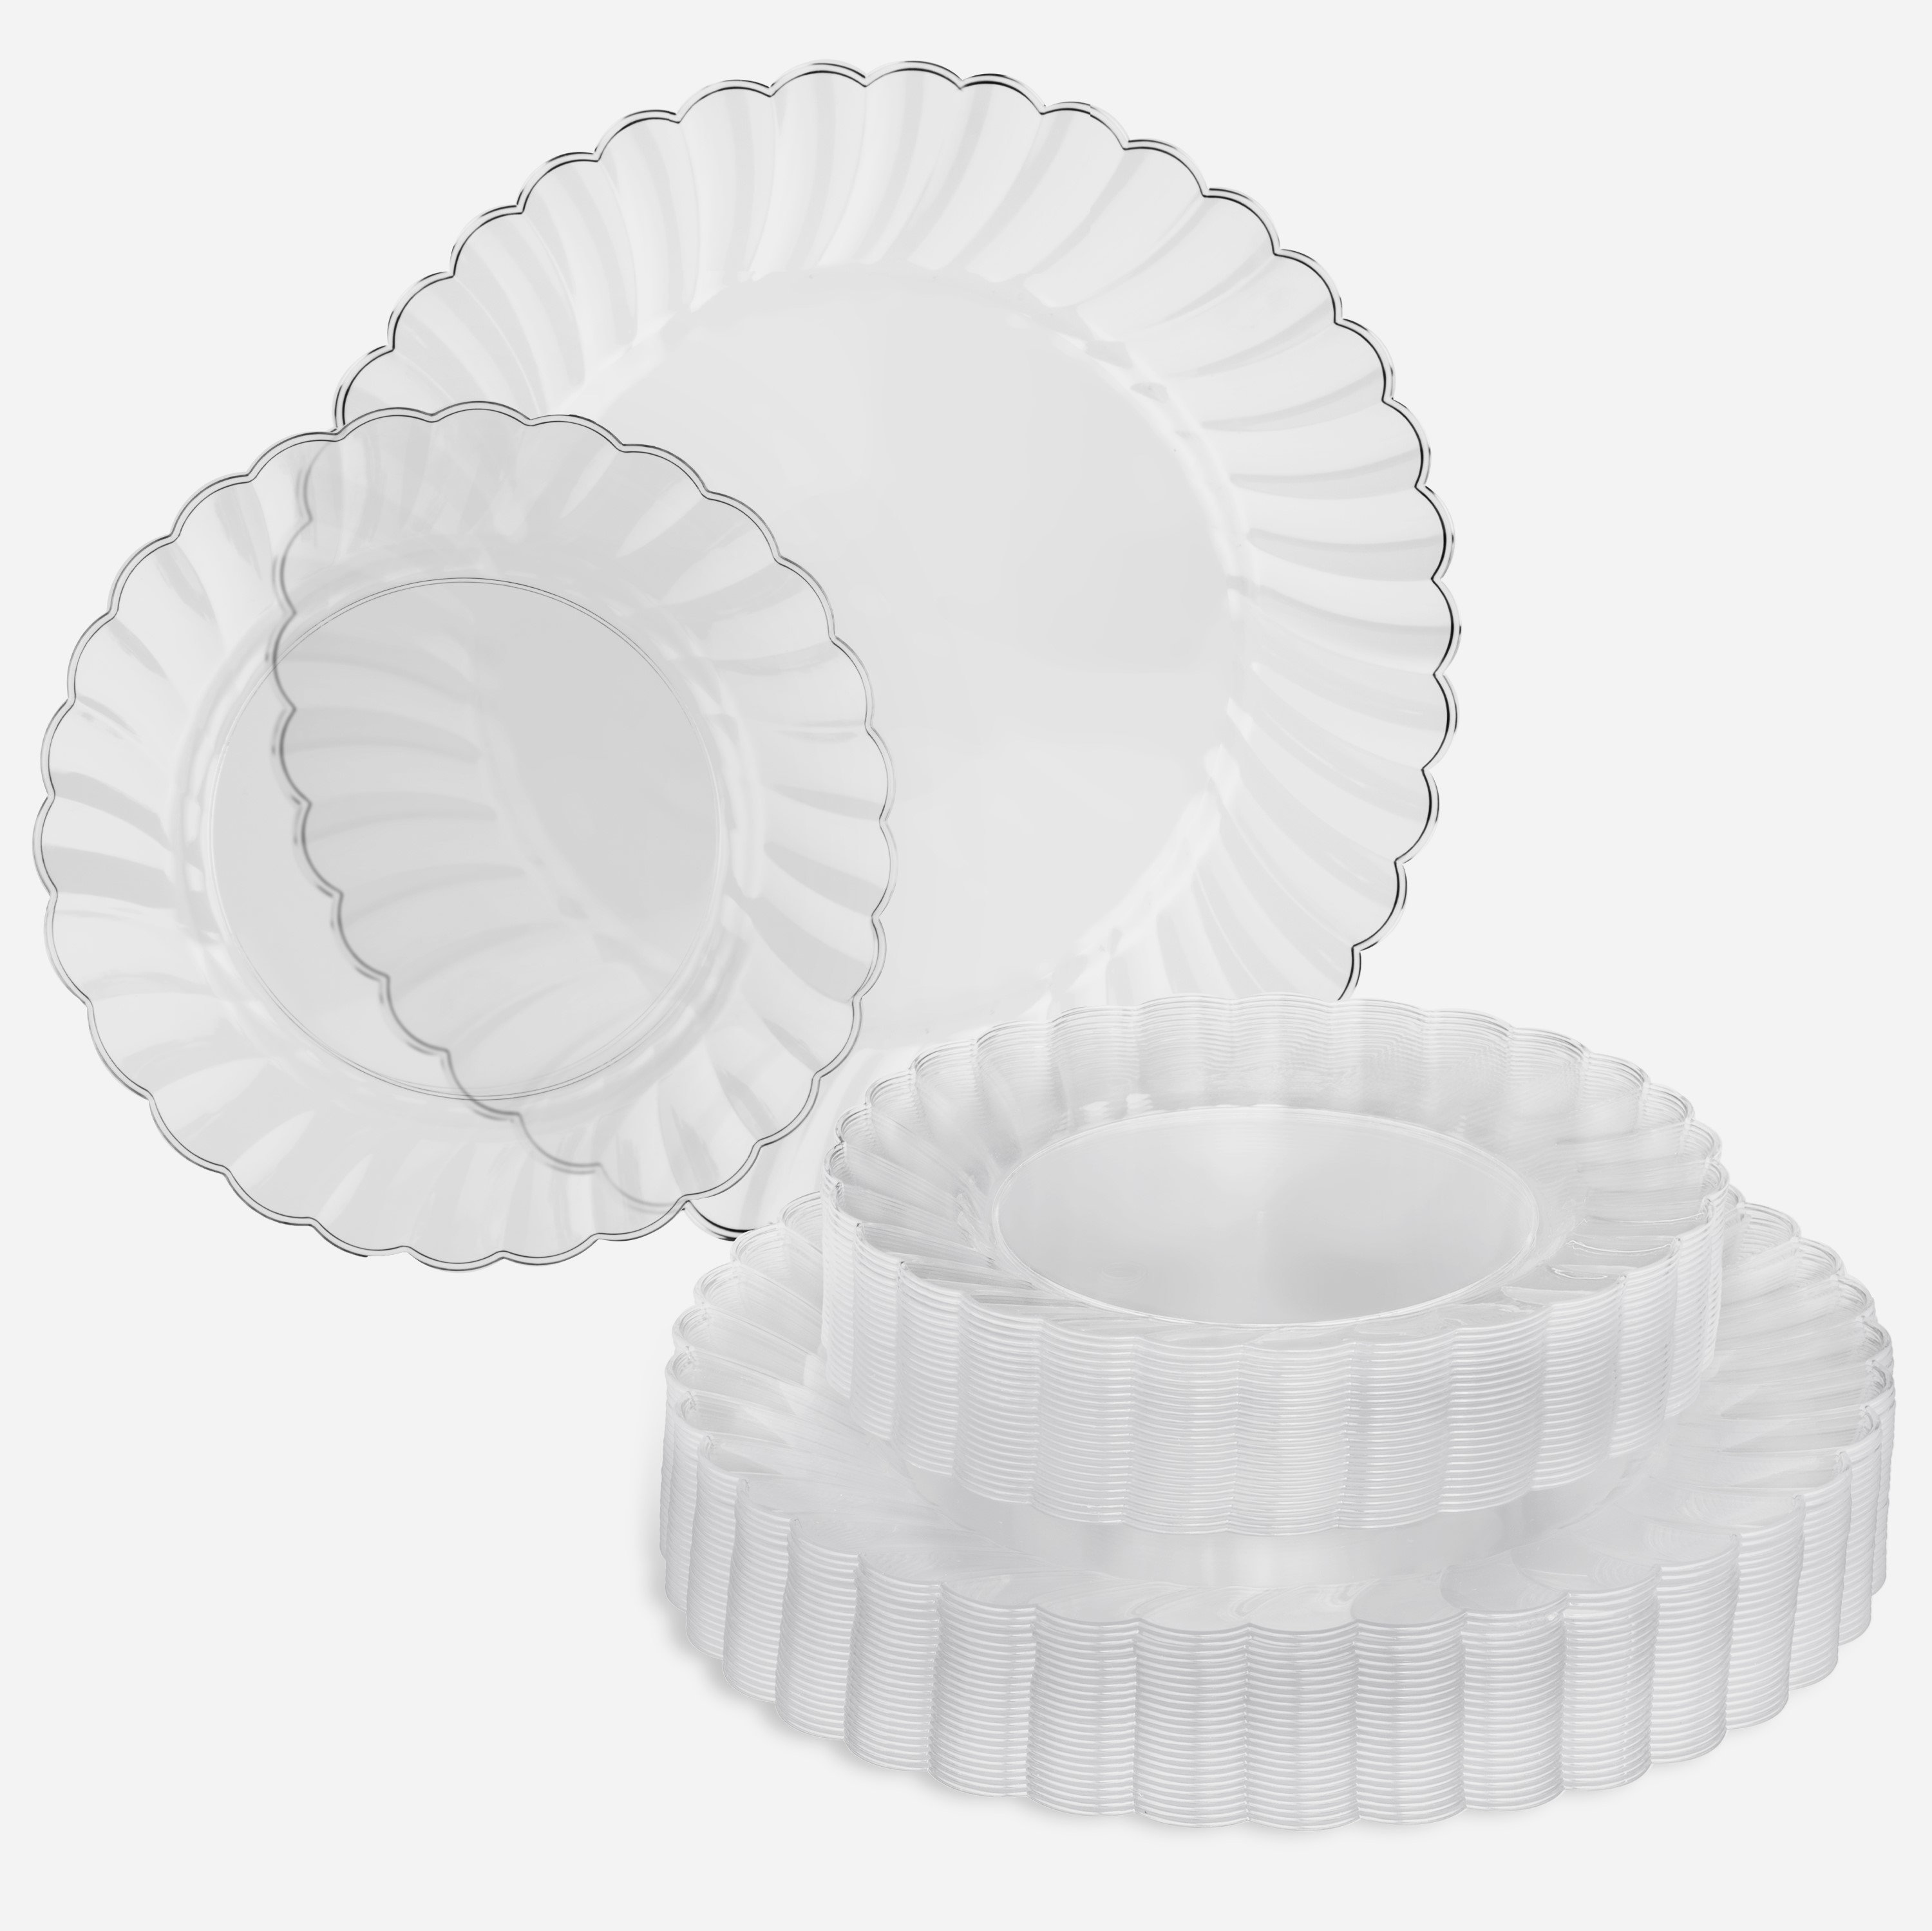 Plastic Cutlery Sets - Clear Flatware Sets, Smarty Had A Party in 2023